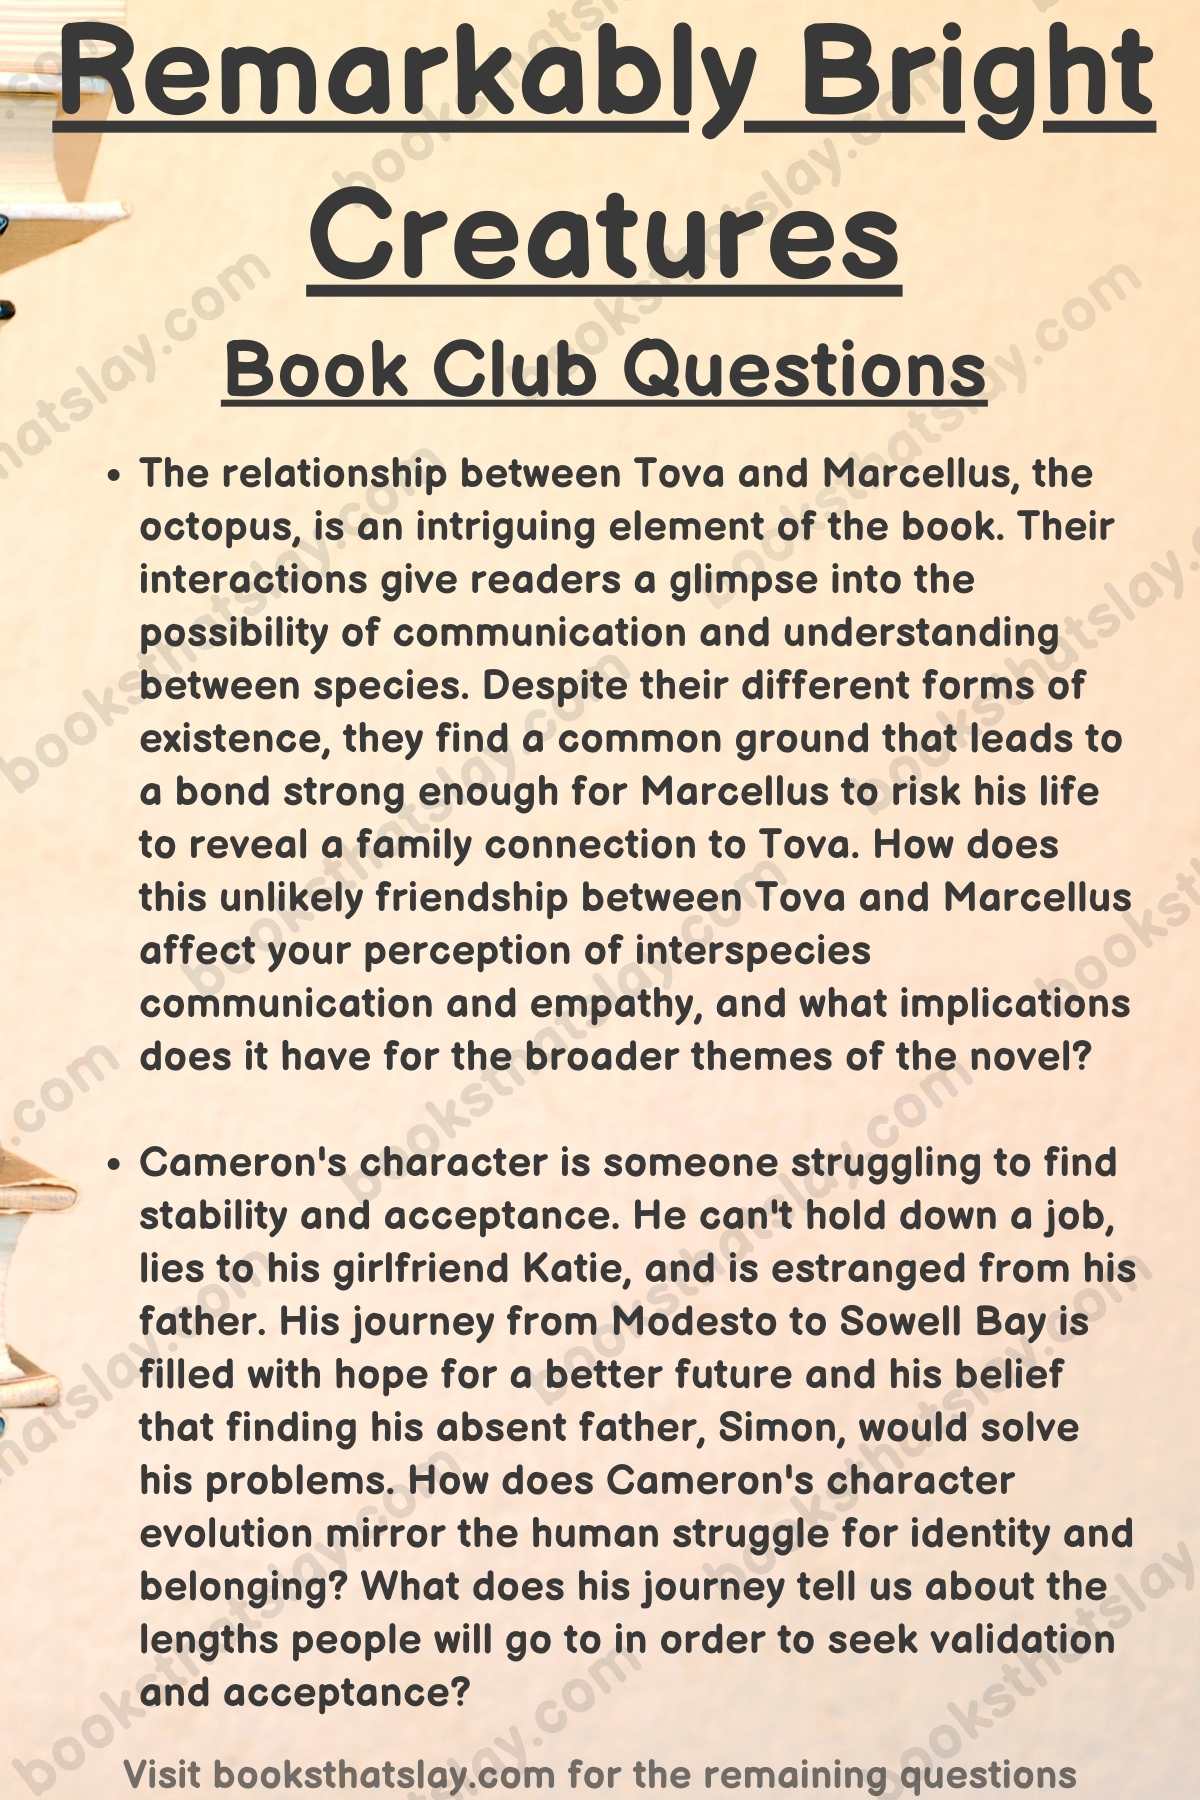 Remarkably Bright Creatures Book Club Questions for Discussion Infographic